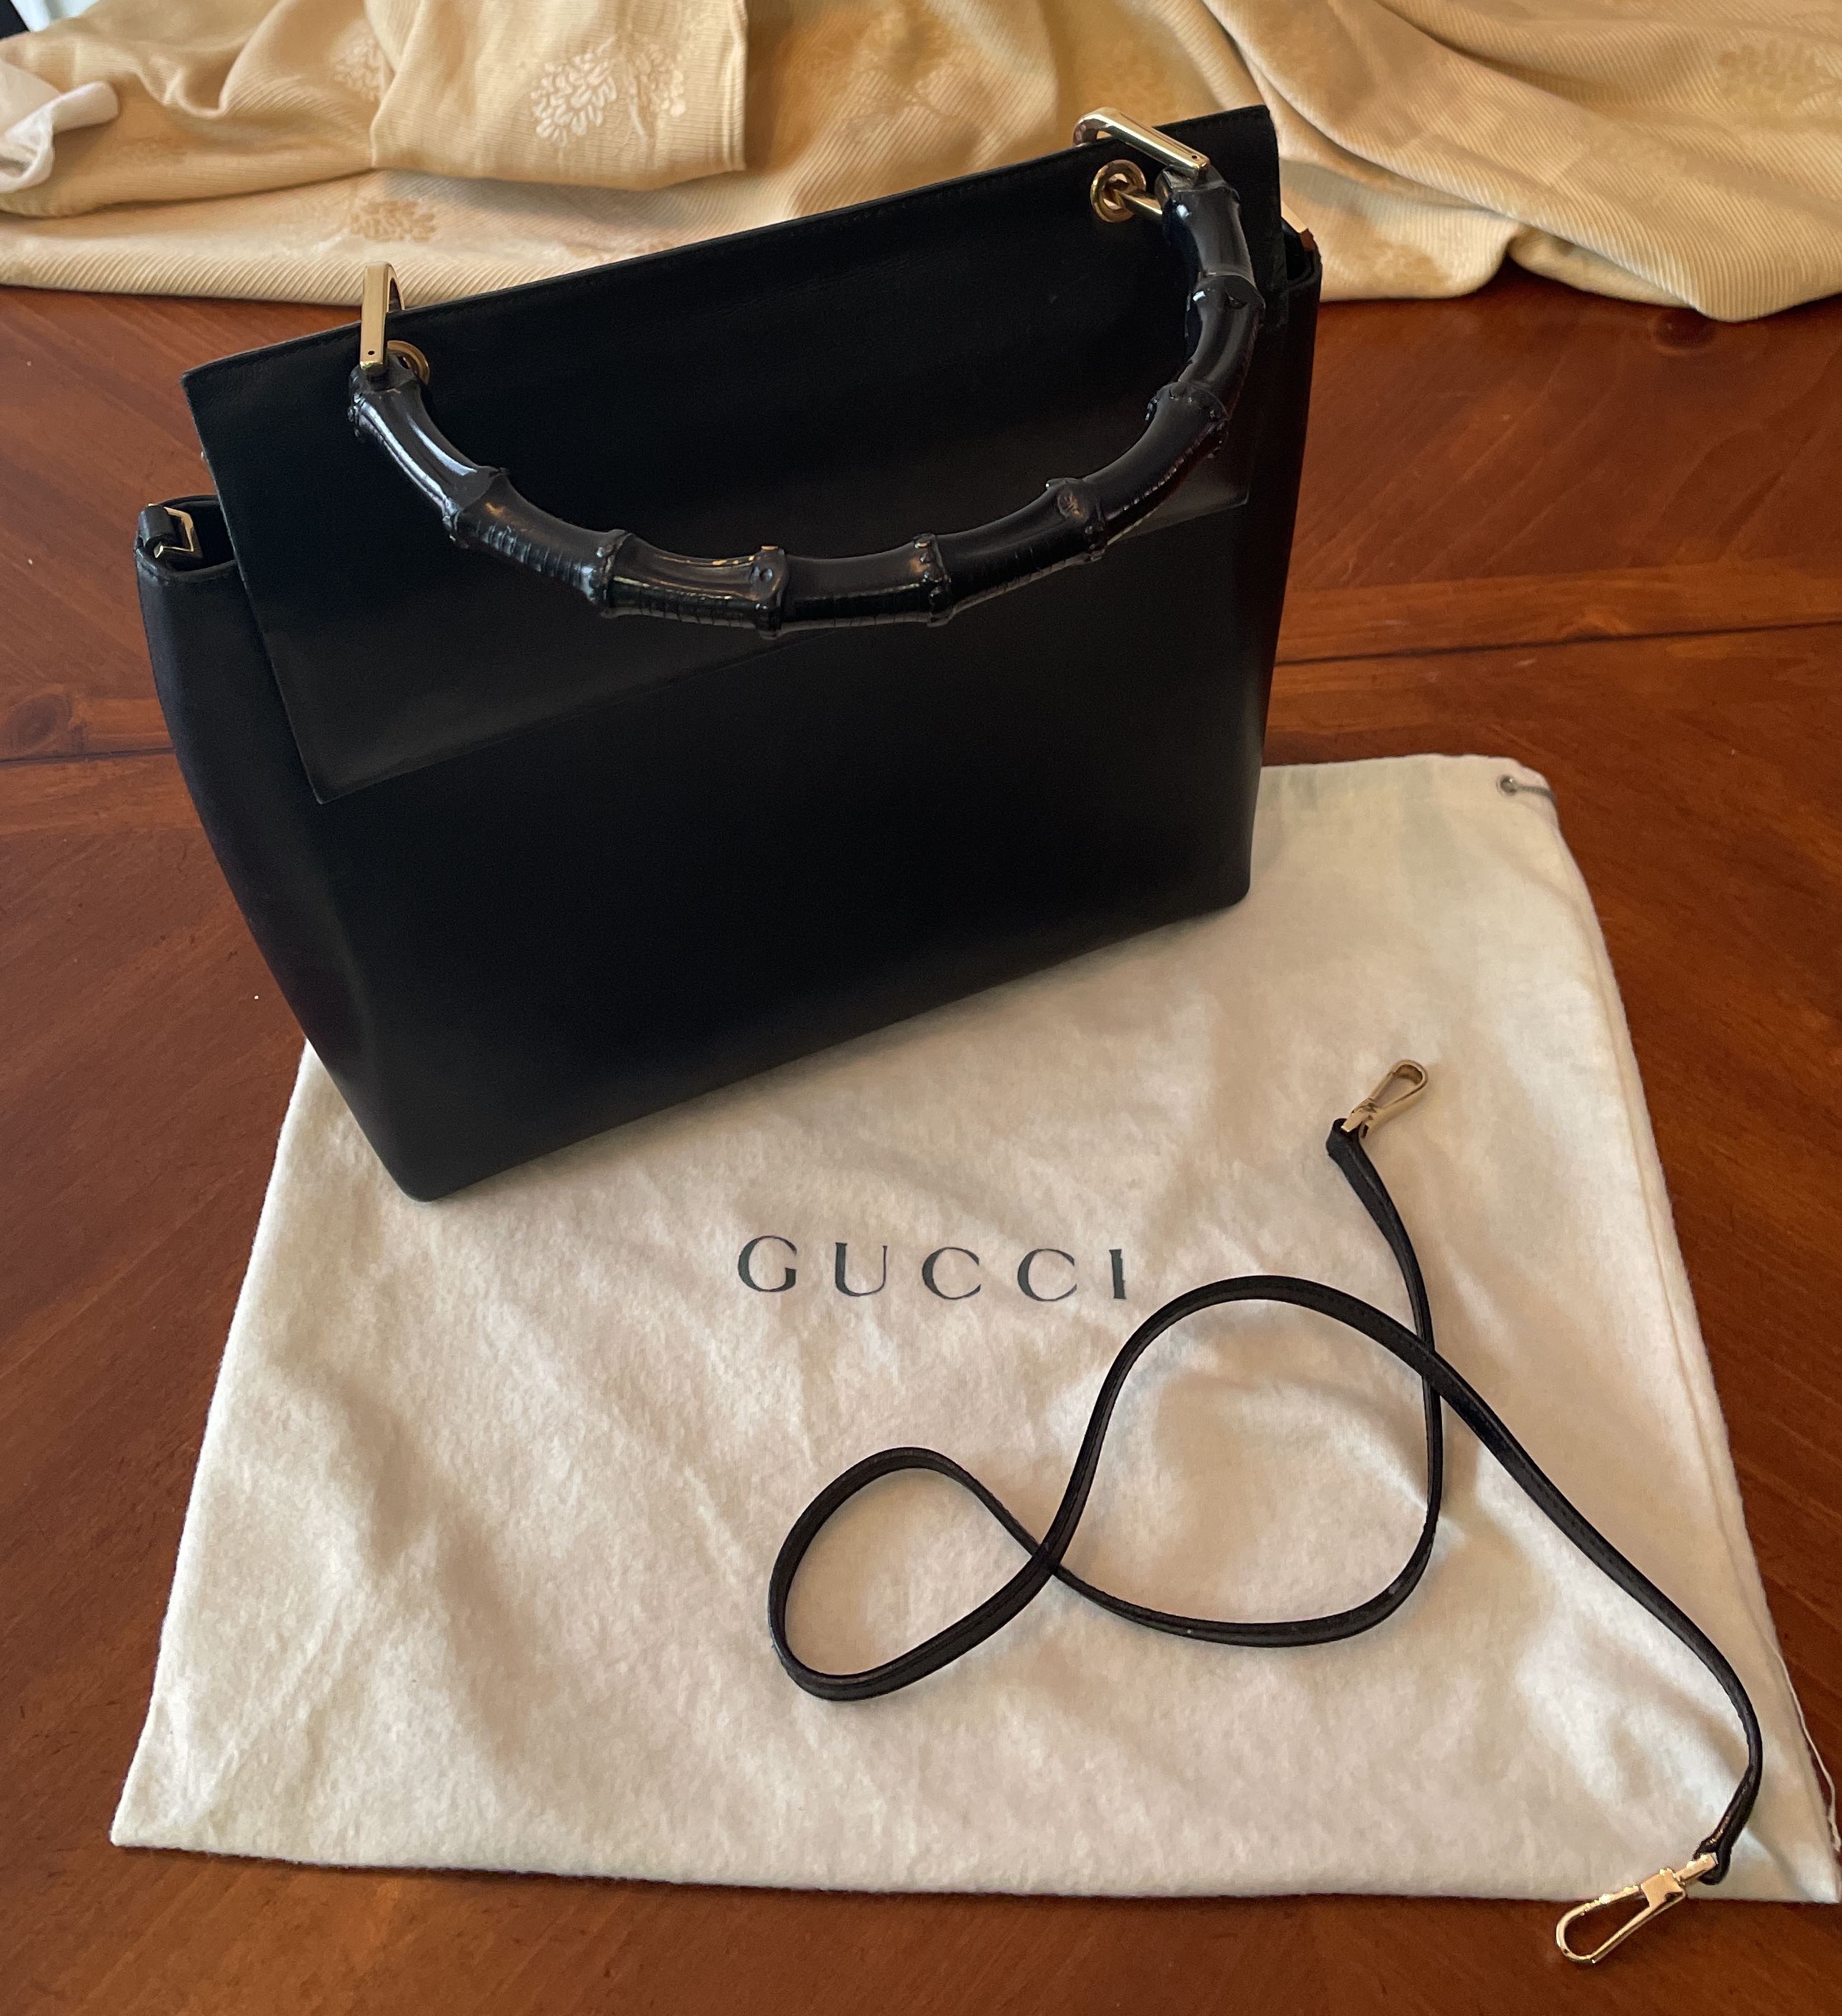 Sold at Auction: Gucci, Gucci - Golf tee holder bag